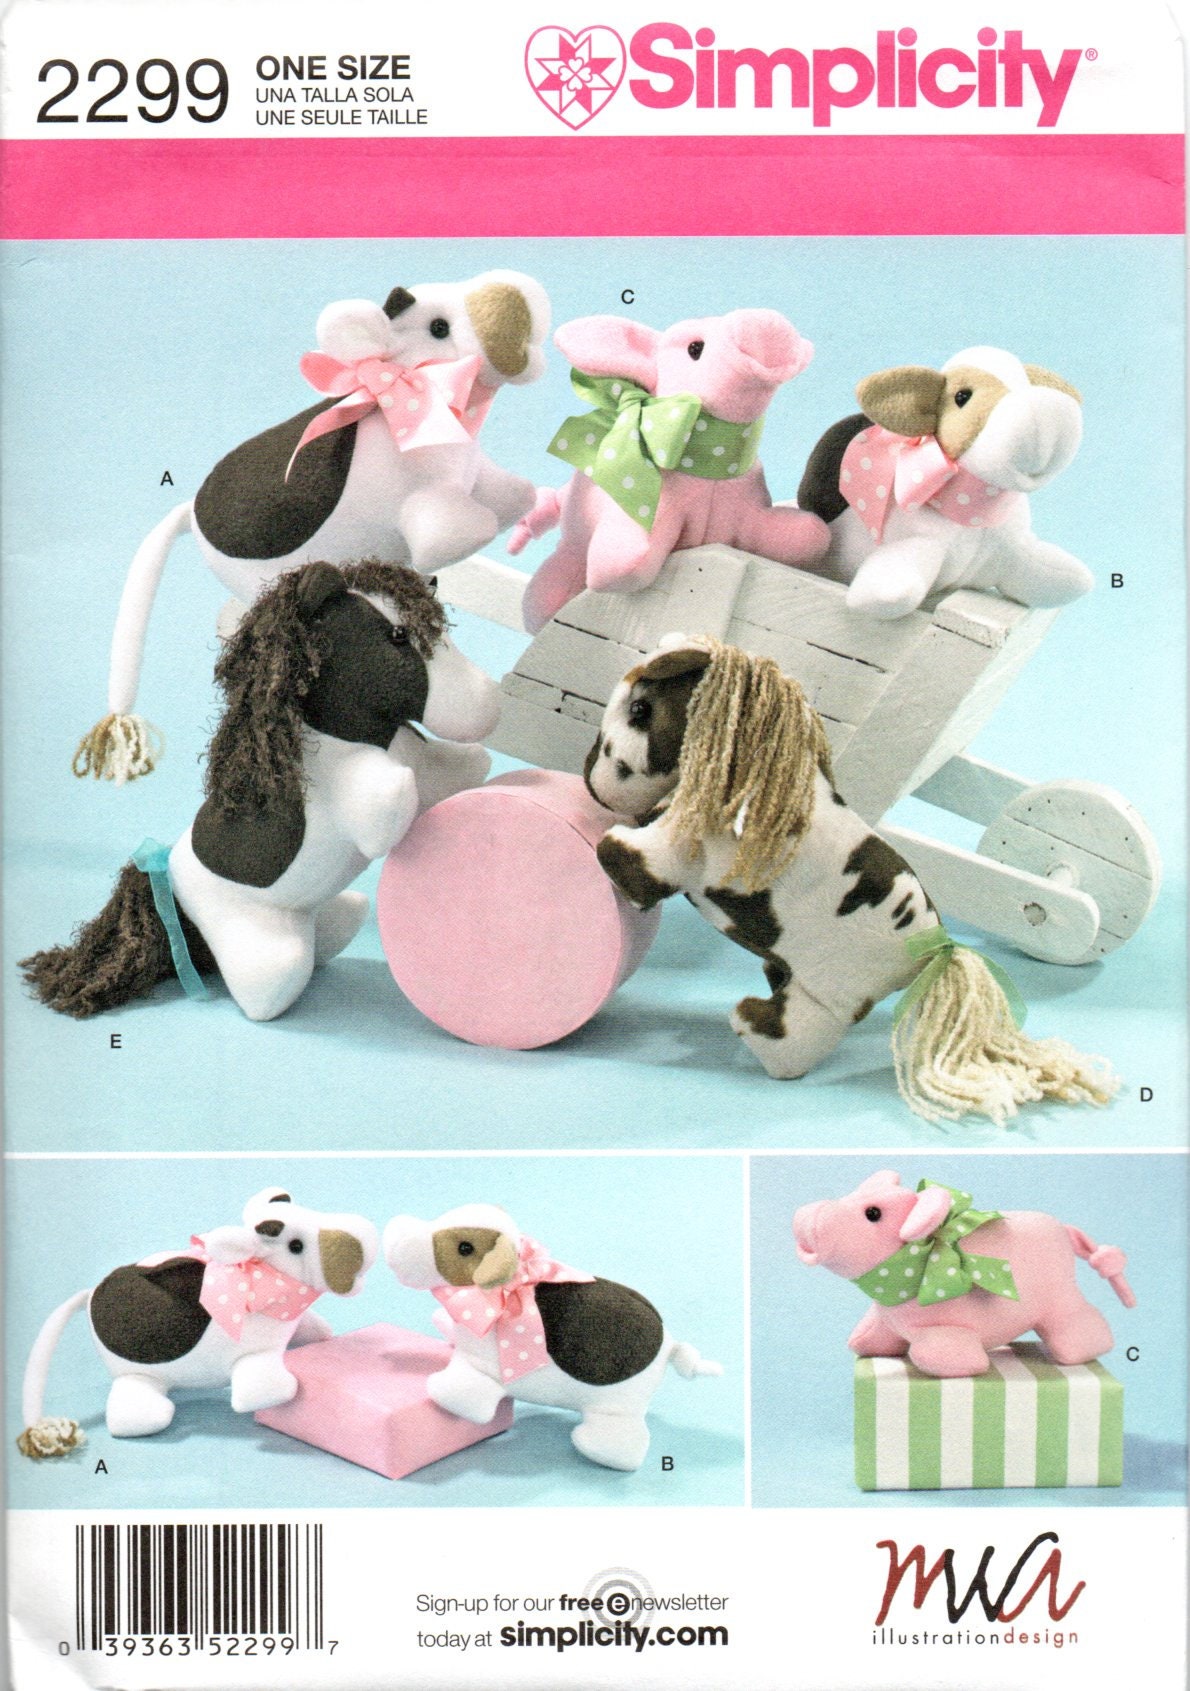  Simplicity Stuffed Animal Sewing Patterns for Children, One  Size Only : Arts, Crafts & Sewing